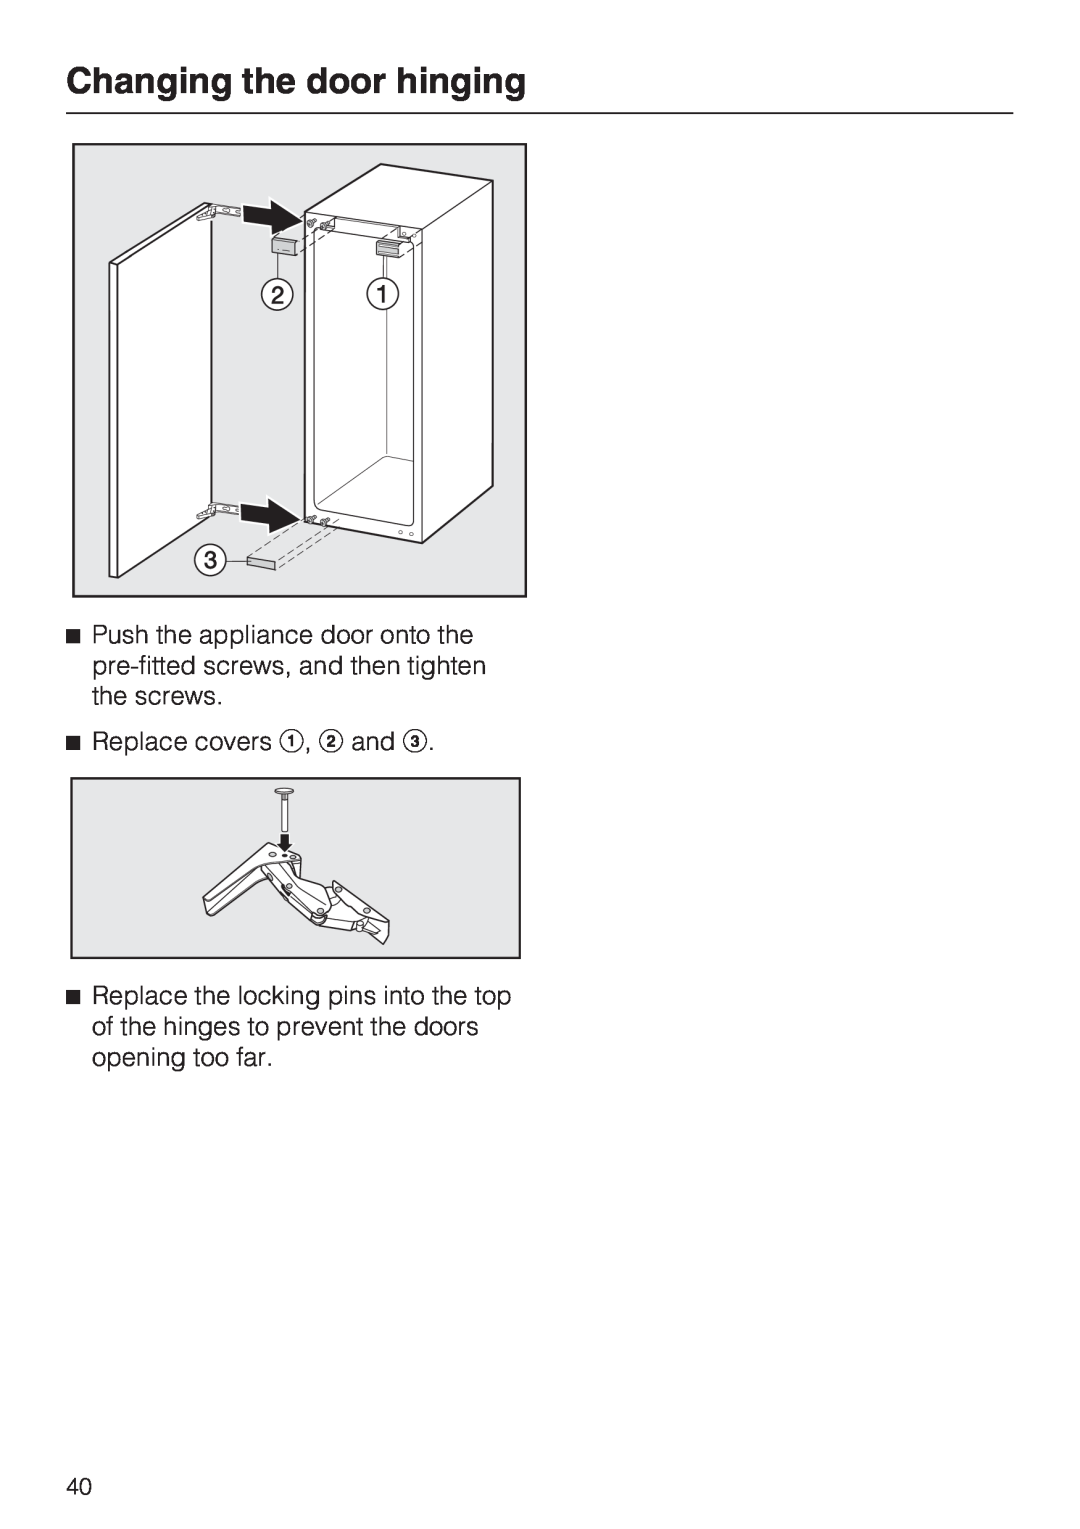 Miele K9752, K9552 installation instructions Changing the door hinging, Replace covers a, b and c 